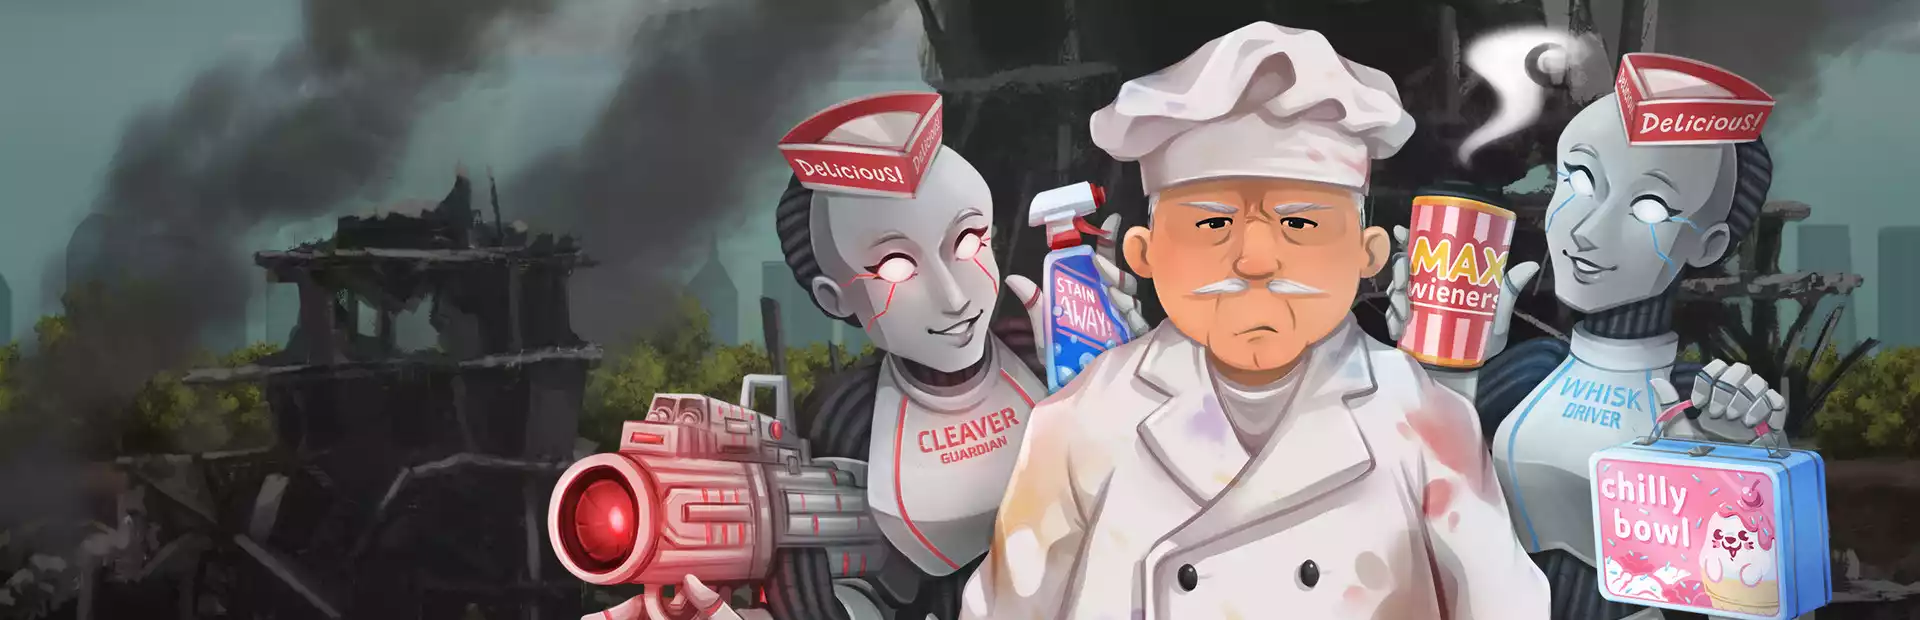 Cook, Serve, Delicious! 3?! Steam Key GLOBAL